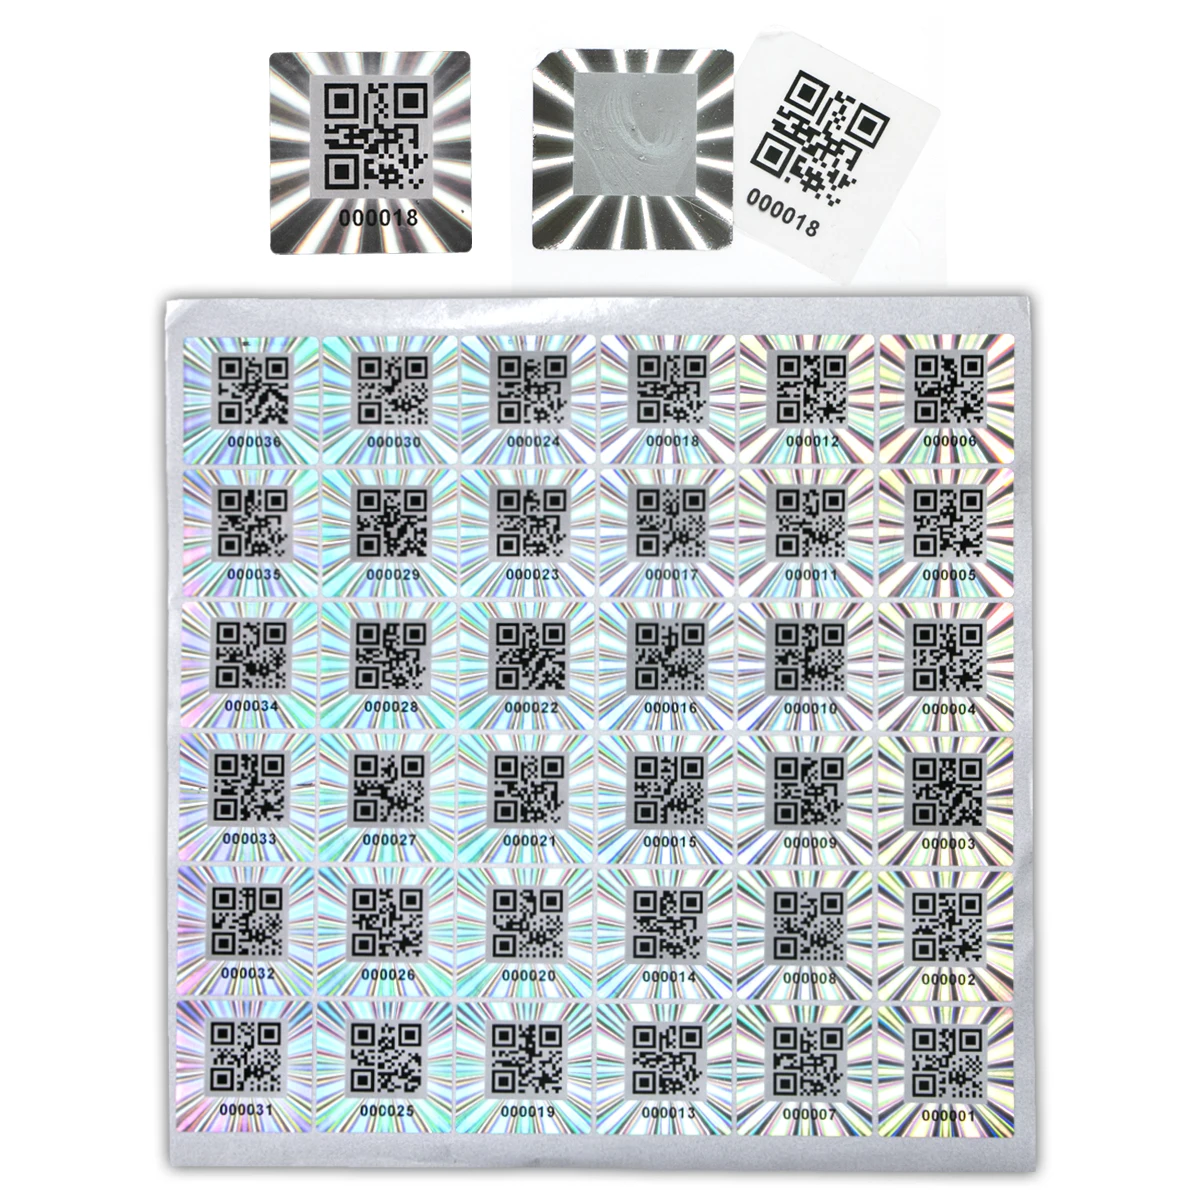 2.5x2.5cm Silver laser Stickers with QR Code Authentic Security seal Holographic warranty void stickers Secure anti-fake label